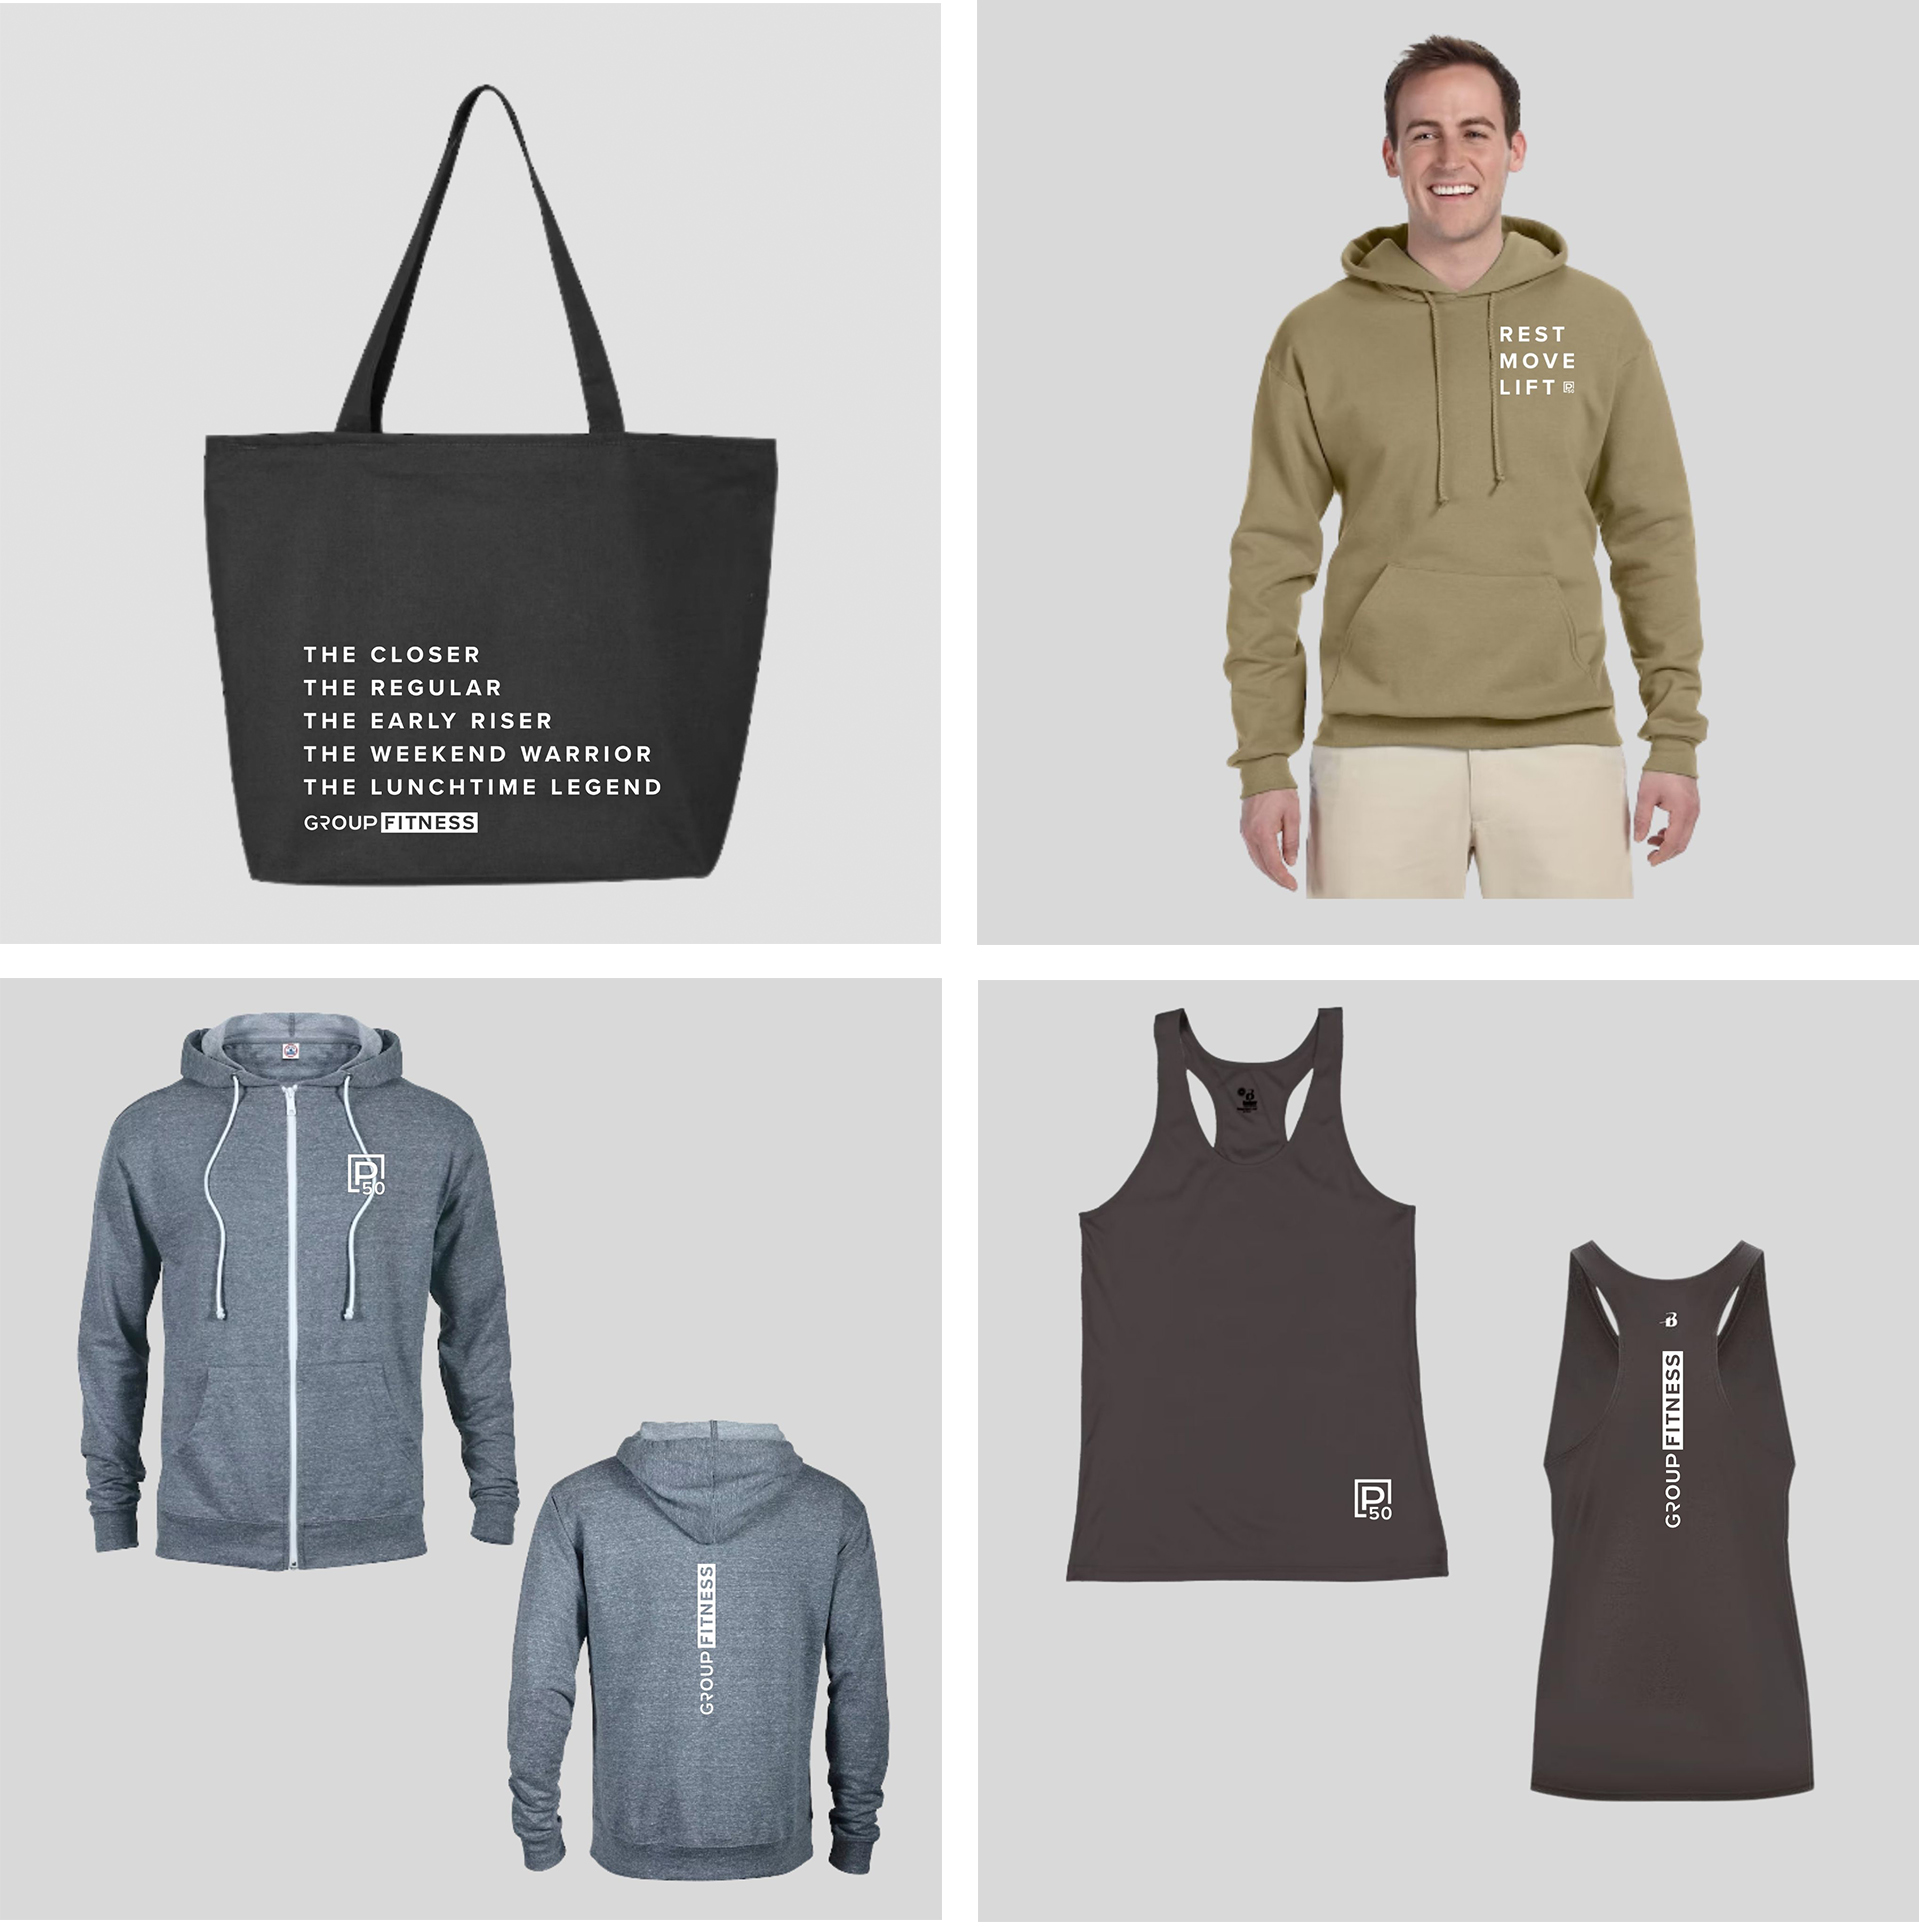 Fall Group Fitness Merch